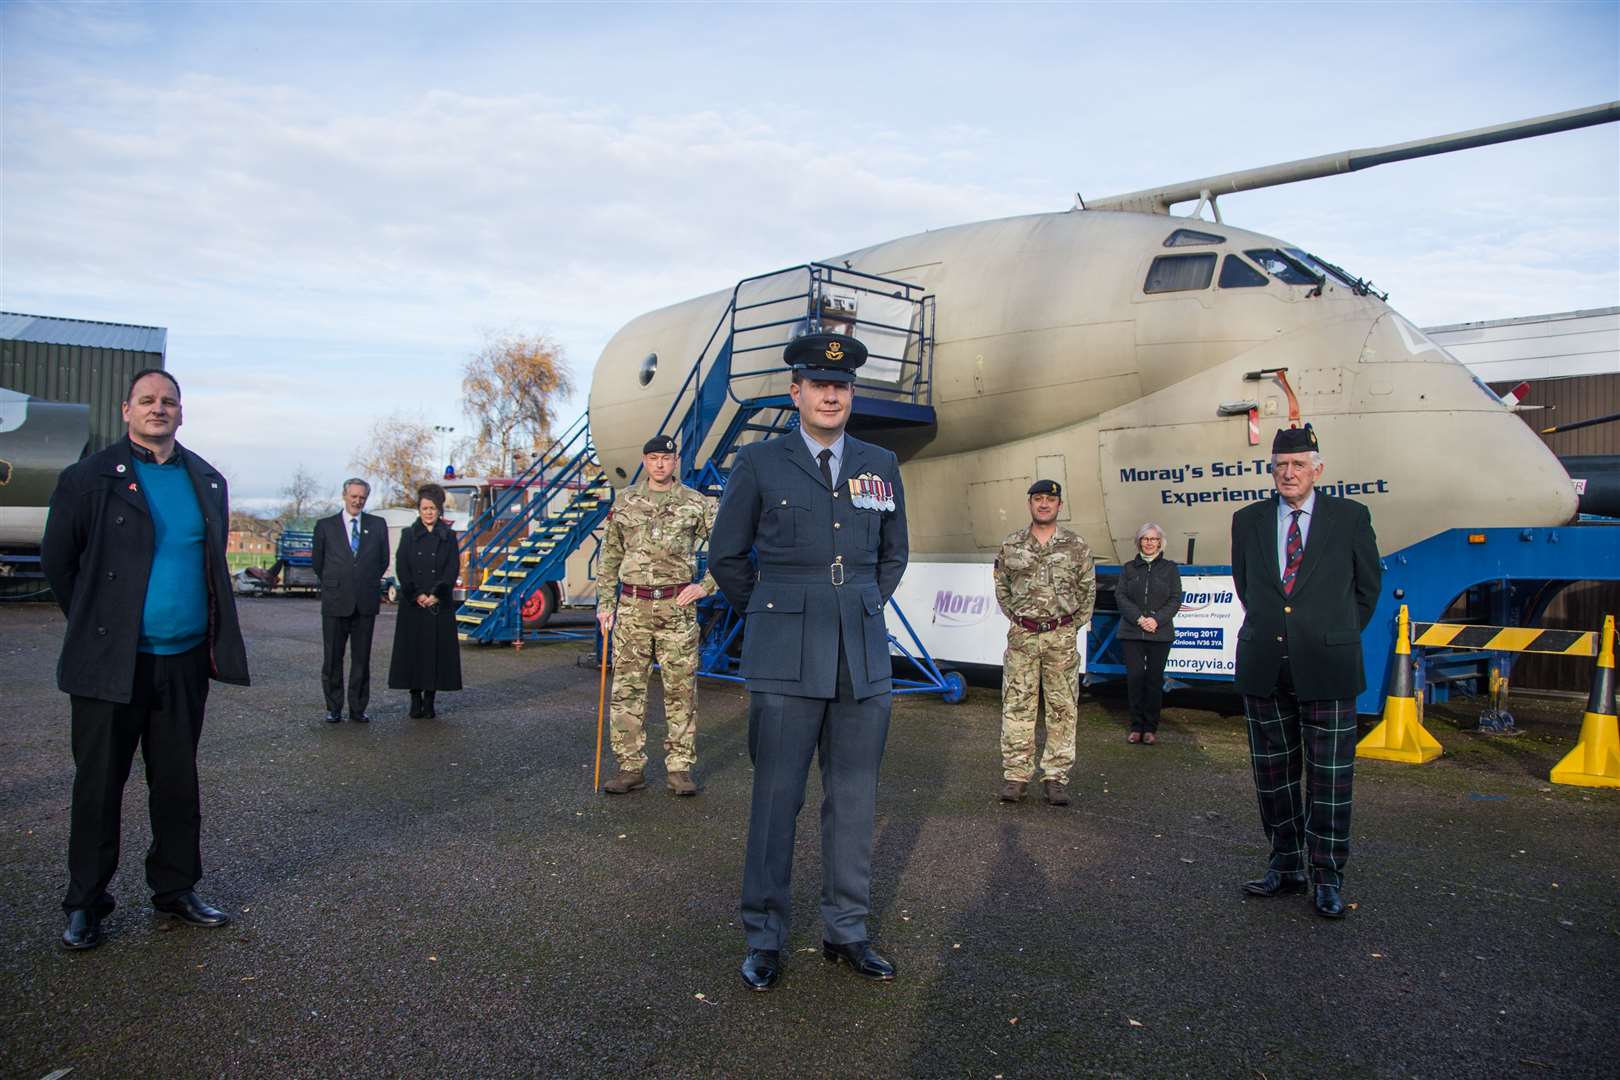 Morayvia Chairman Mark Mair (L) and Lord Lieutenant Seymour Monro (R) at a memorial ceremony for the loss of XV256. They are joined by Councillor John Cowe and wife Joan, WO2 (SSM) Bruce Terris, 120 Squadron Leader Pete Surtess, Capt Shane Middleton and Lynne Herbert Morayvia Director. Picture: Becky Saunderson..